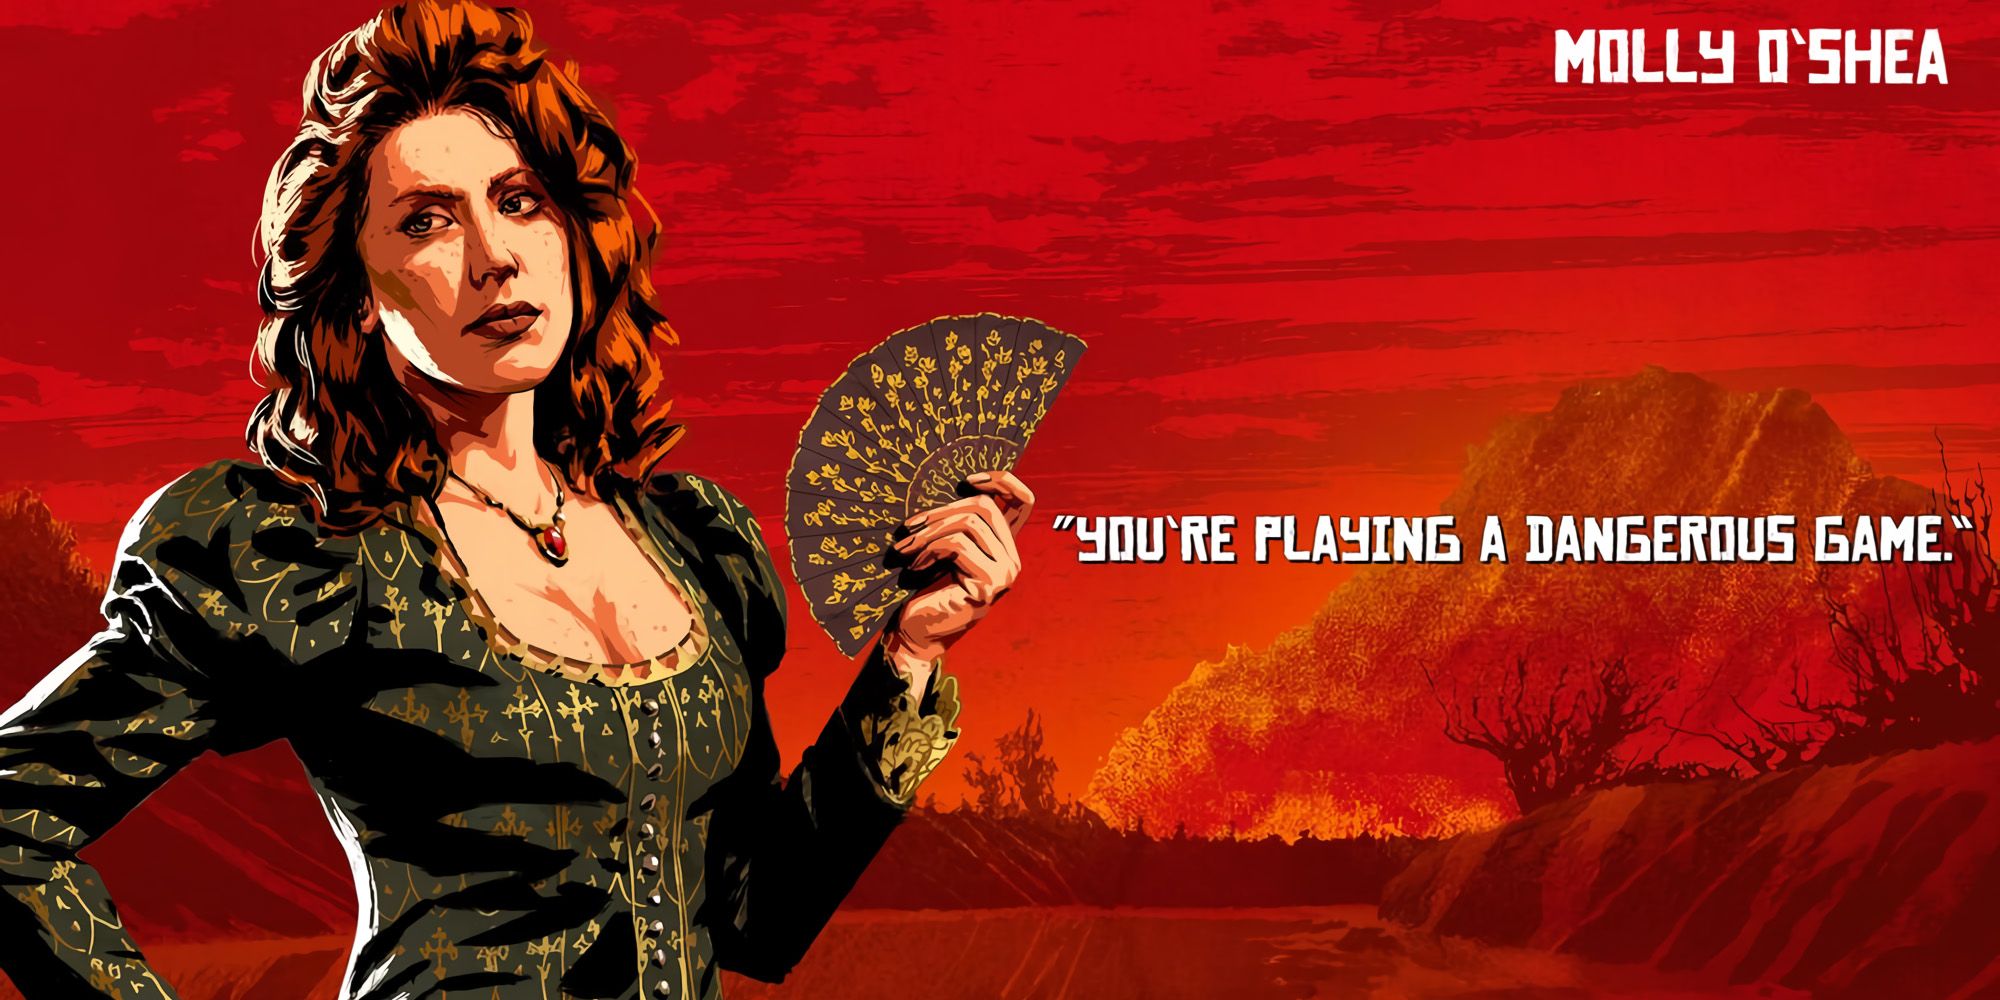 Molly O'Shea Red Dead Redemption 2 Promotional Art